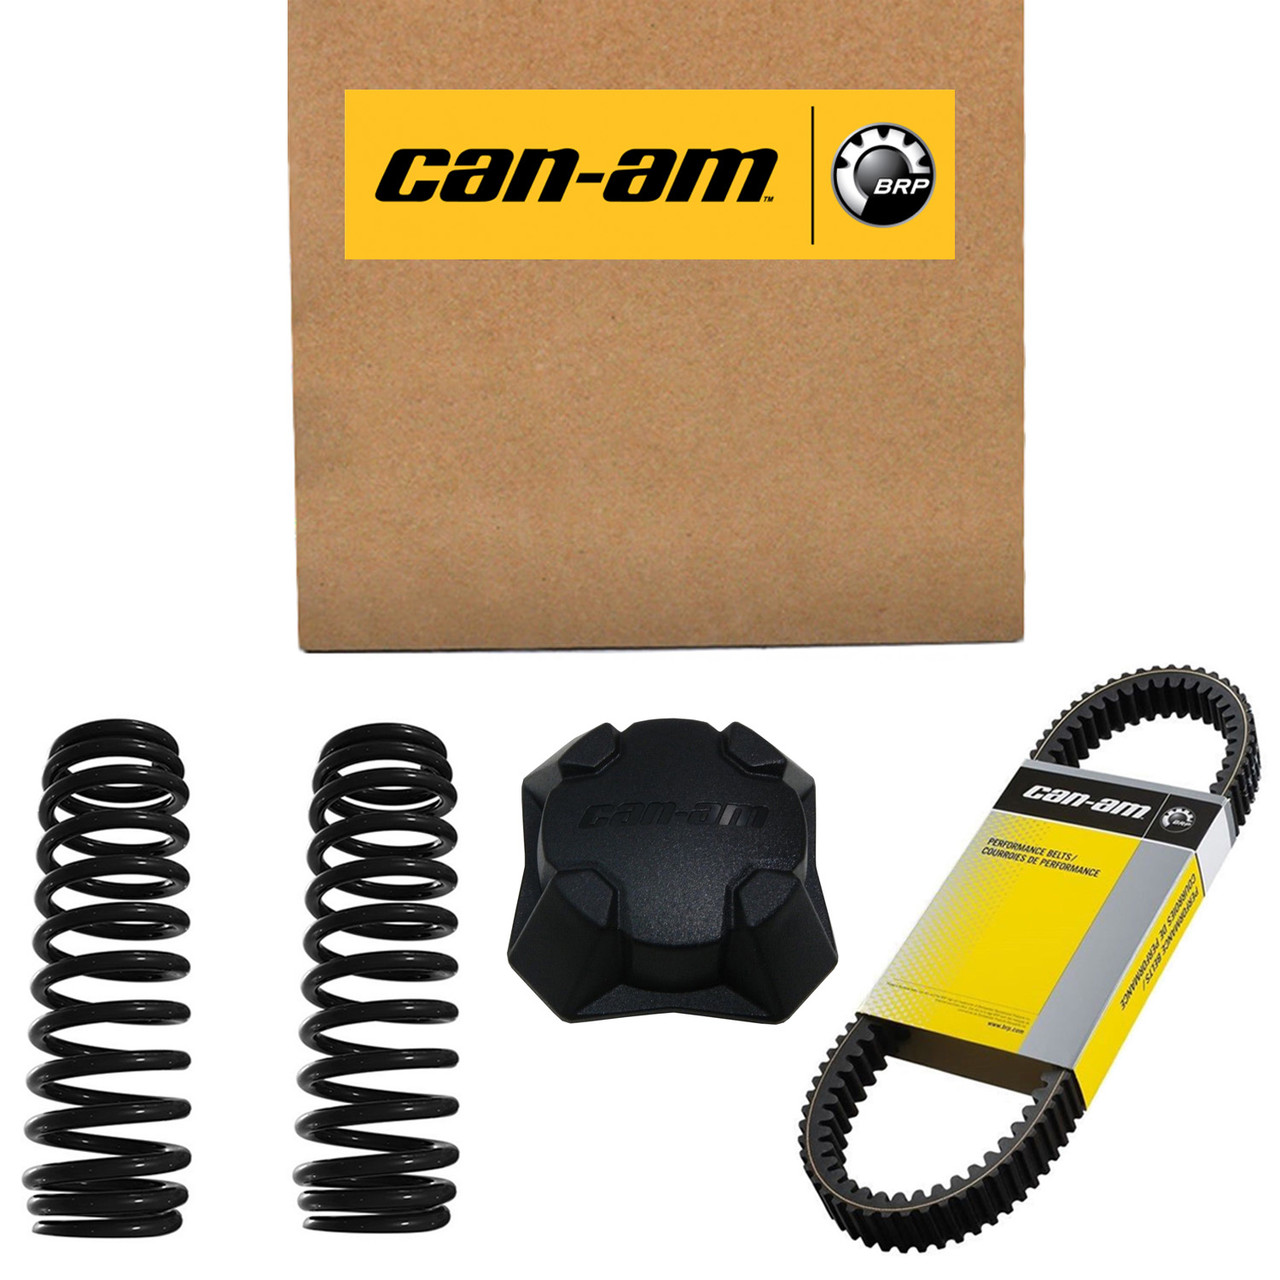 Can-Am New OEM Electronic Box, 420266766